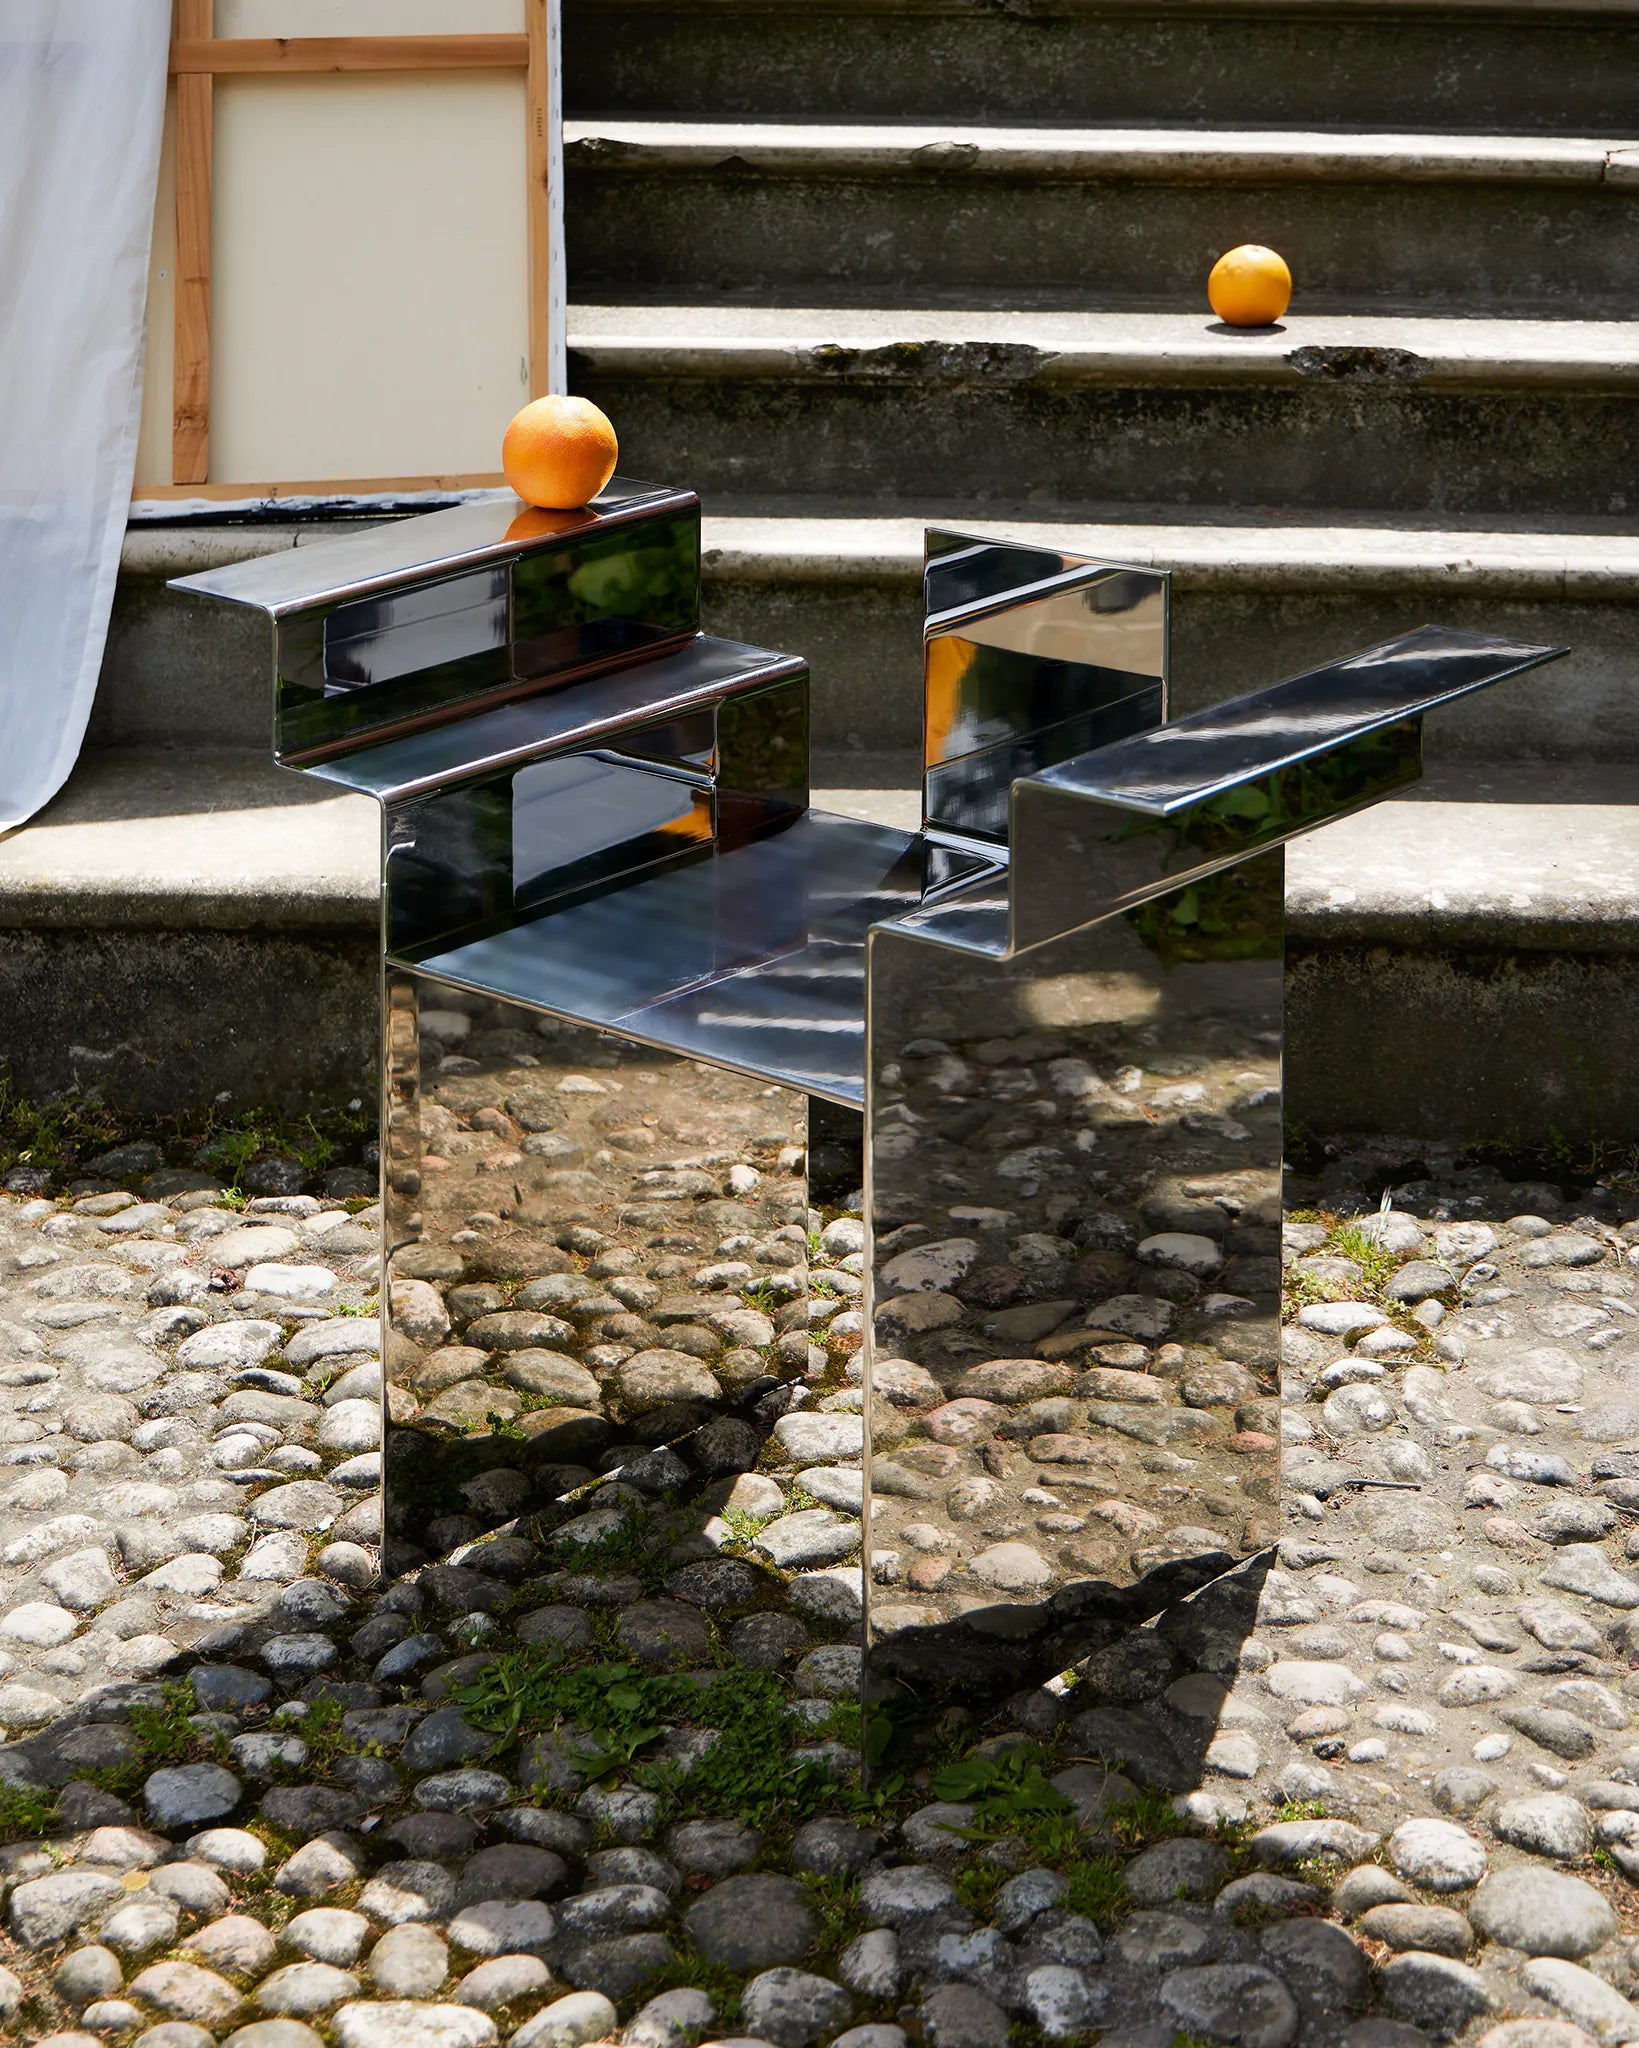 detail of a stainless-steel mirror chair with mesoamerican temple-like shape, with scene props like an orange and a curtain